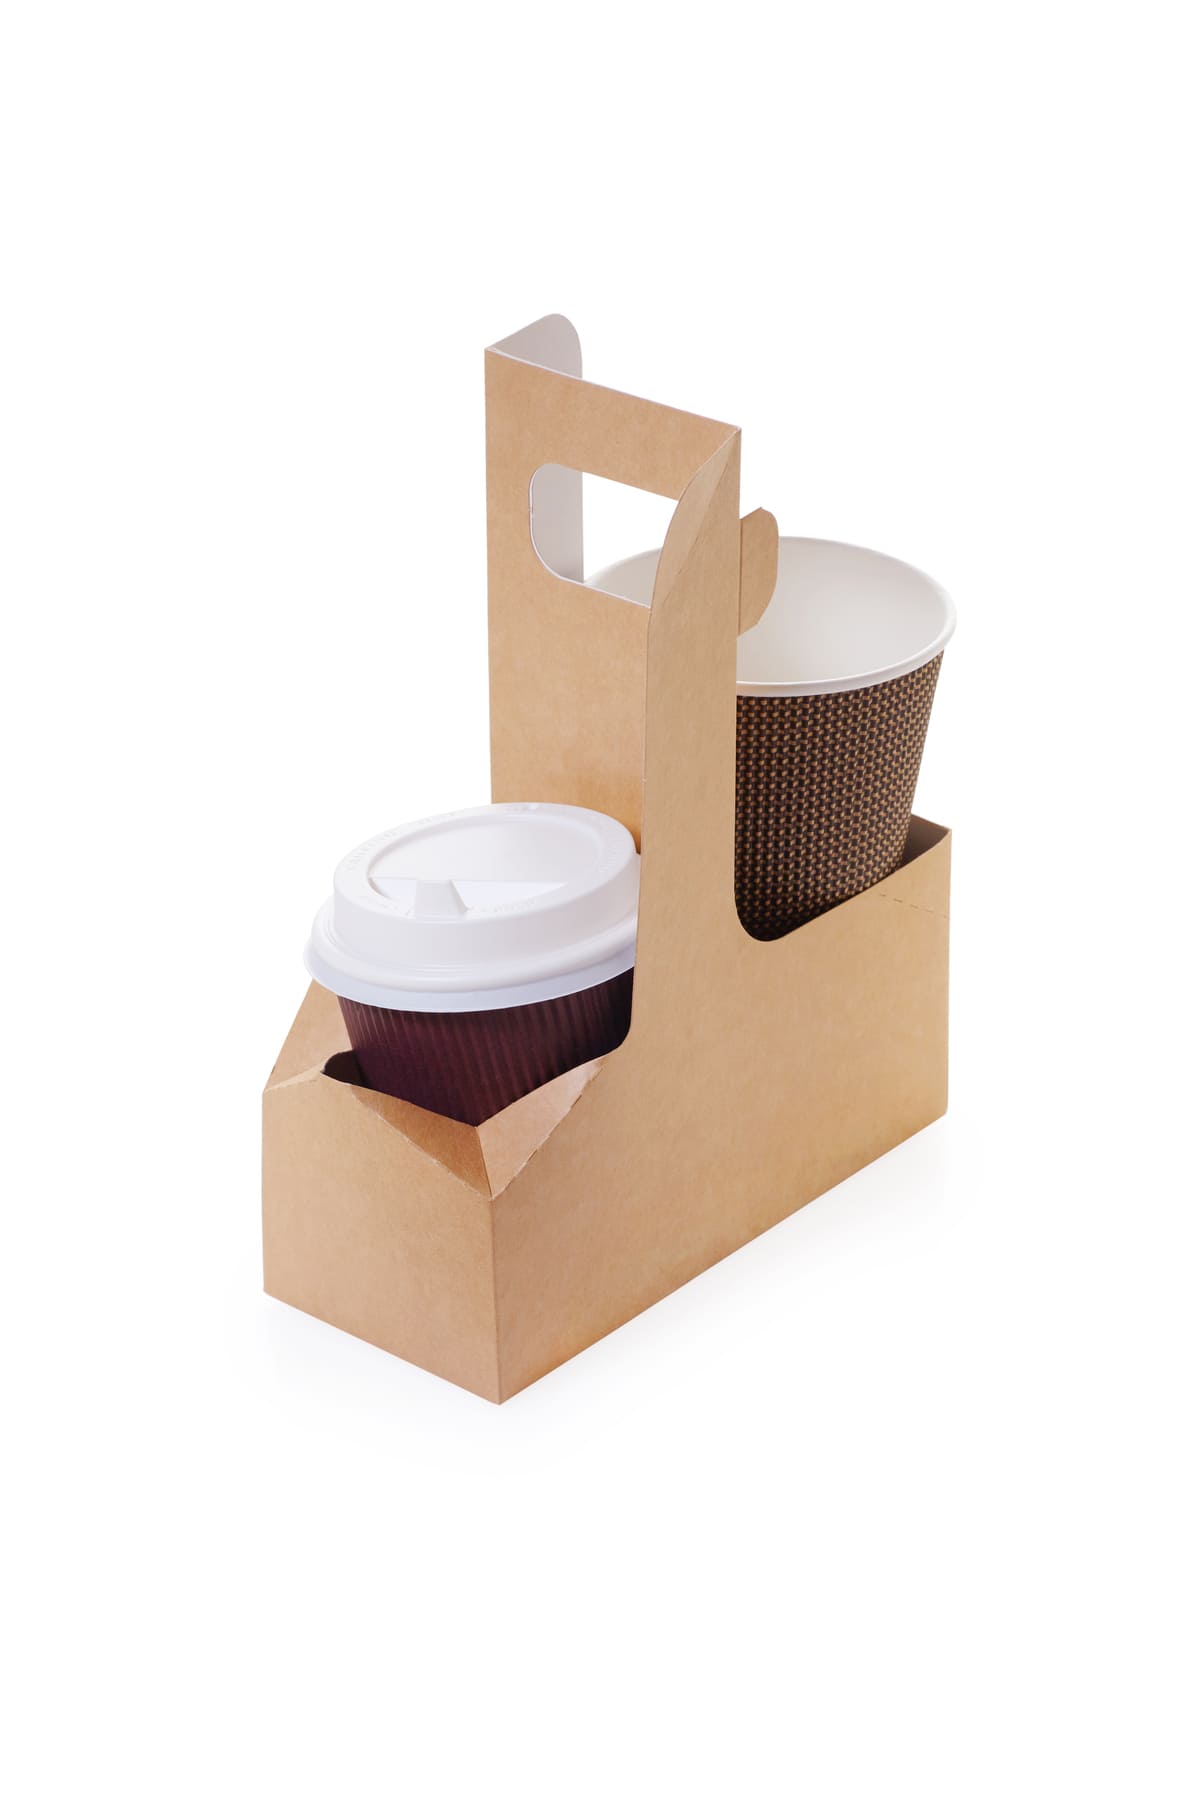 Supports OSQ CUPHOLDER pour les verres